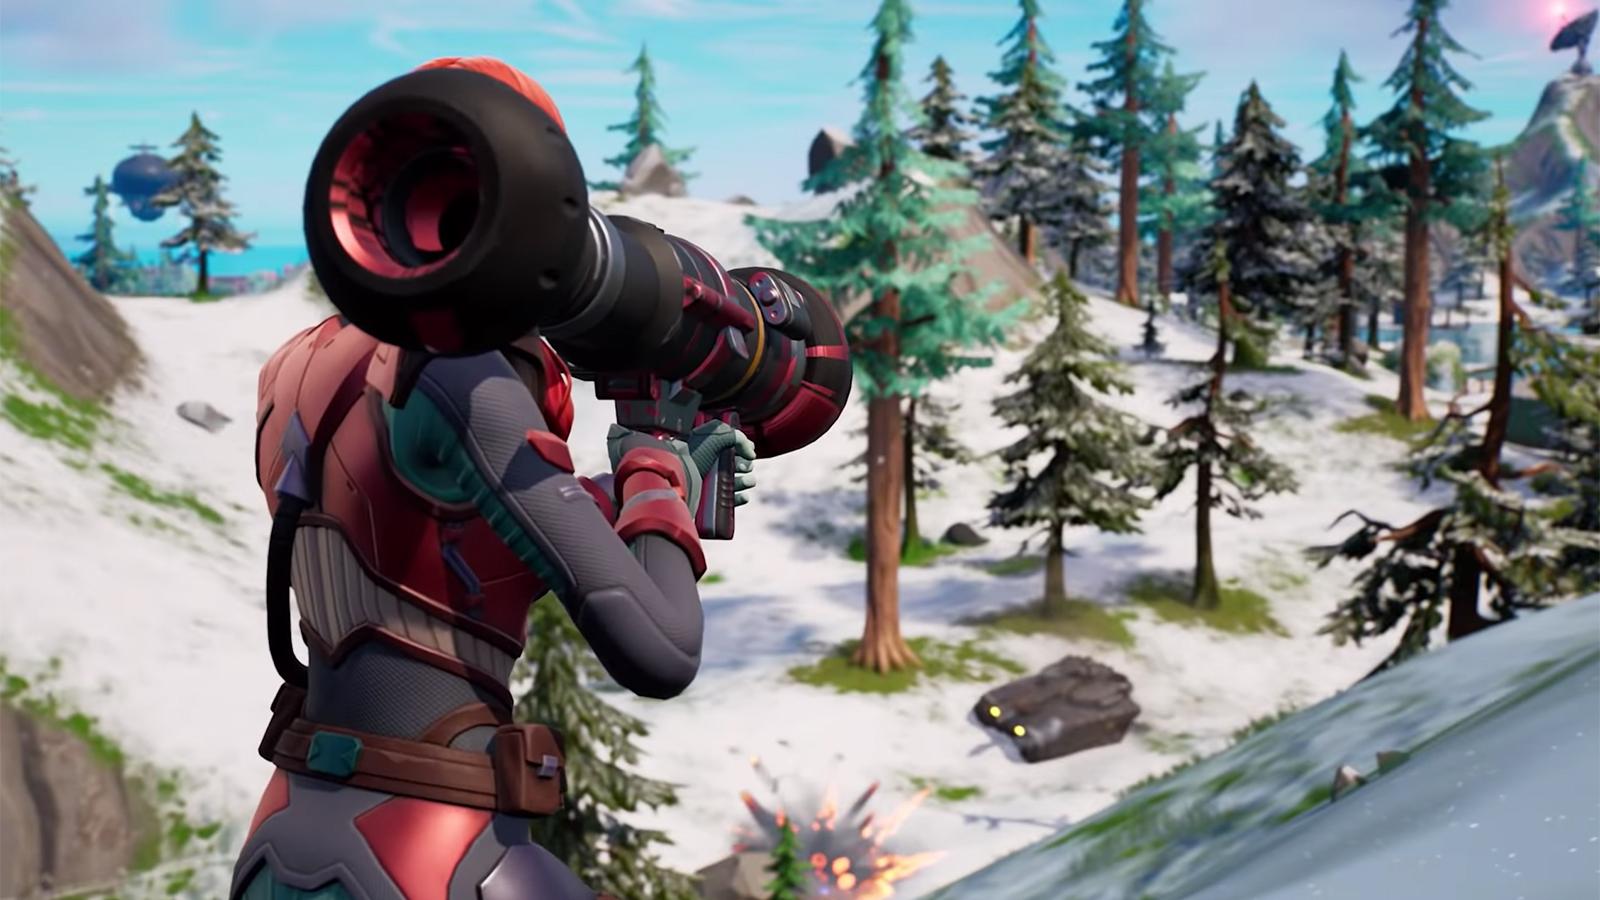 A player using the Anvil Rocket Launcher in Fortnite